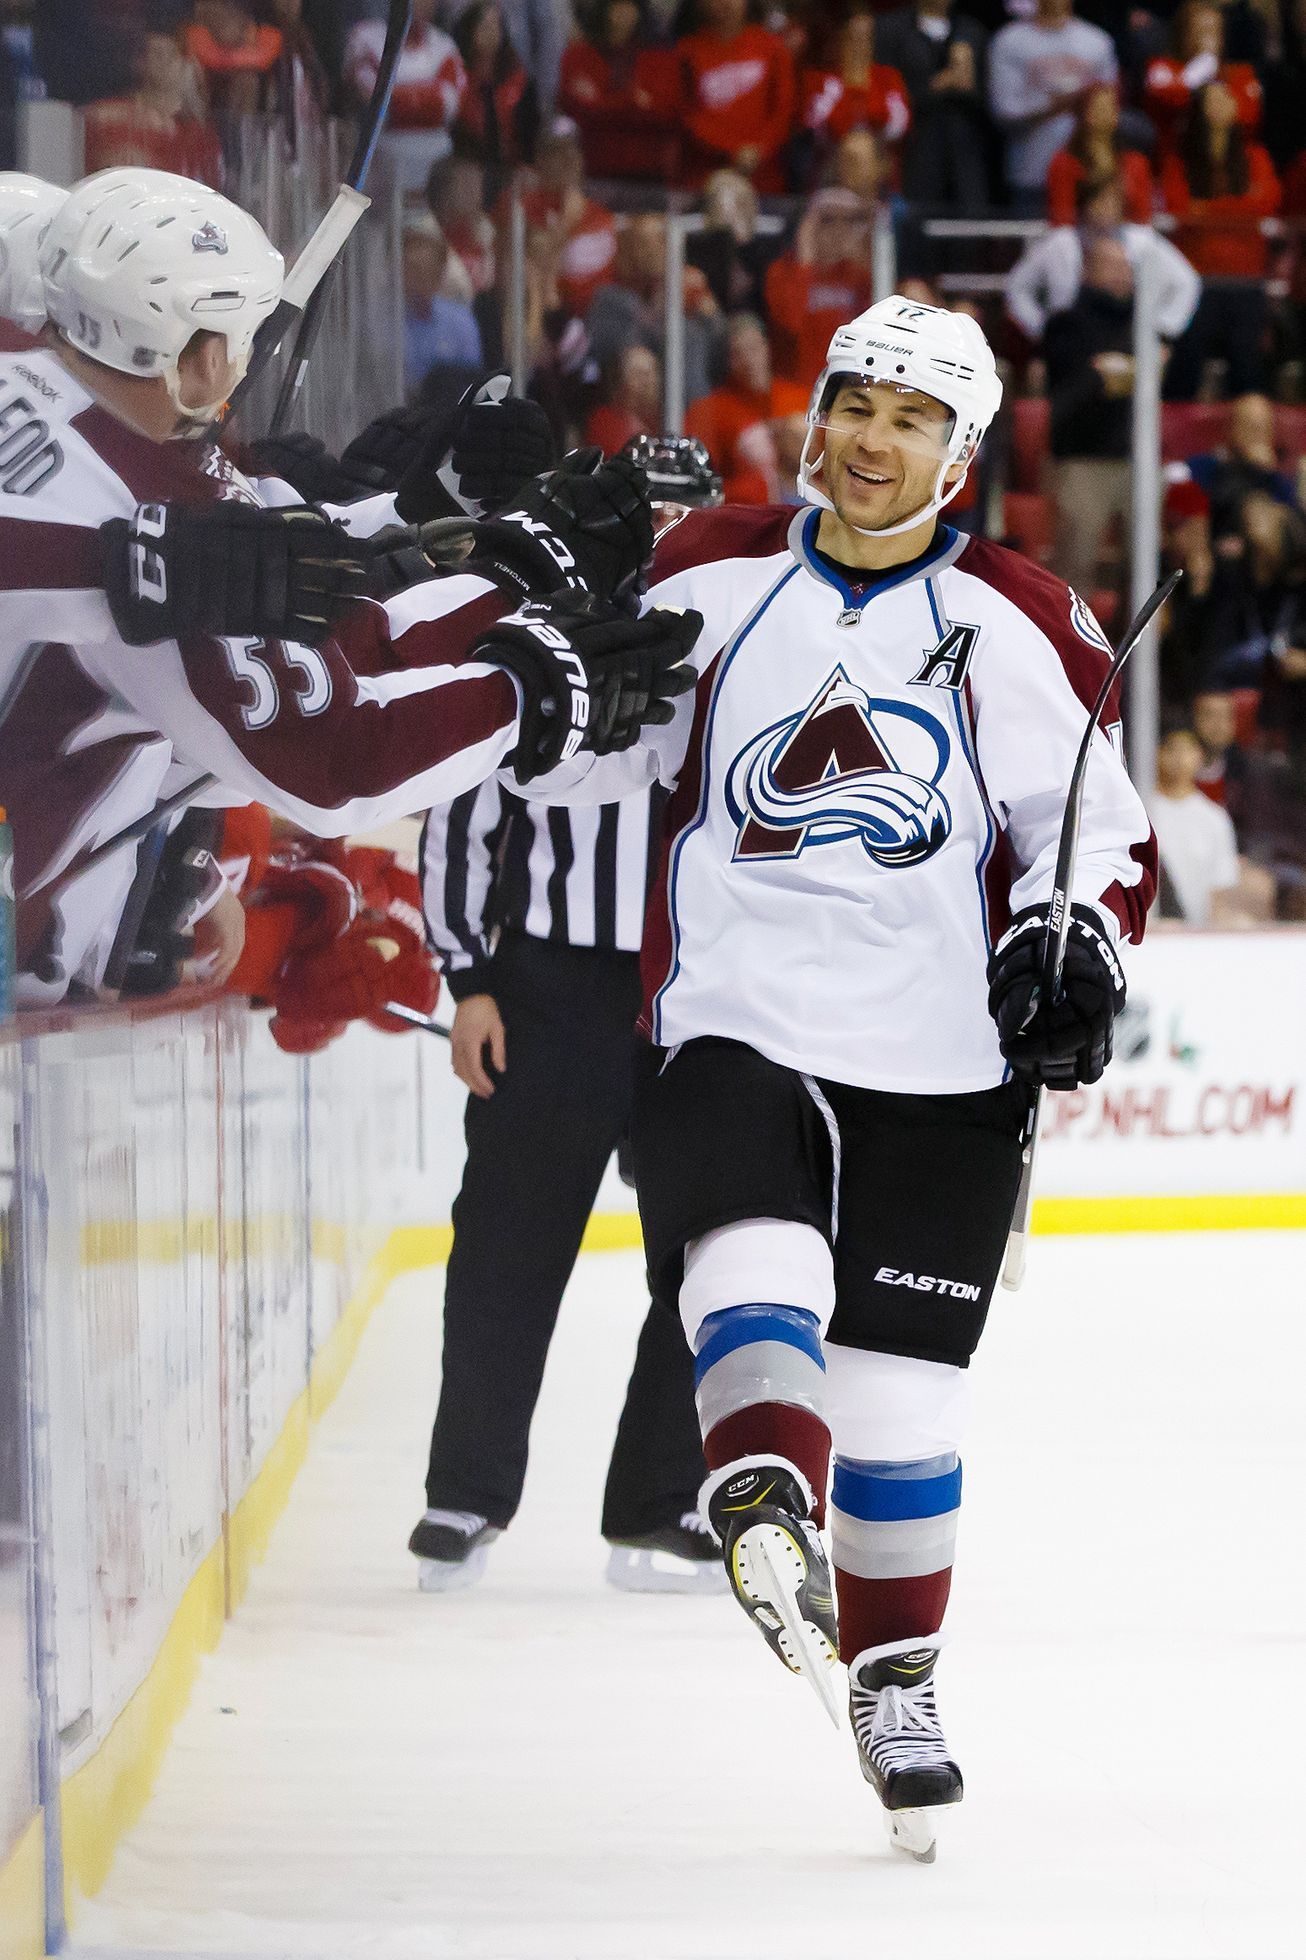 NHL: Colorado Avalanche at Detroit Red Wings (Jarome Iginla)